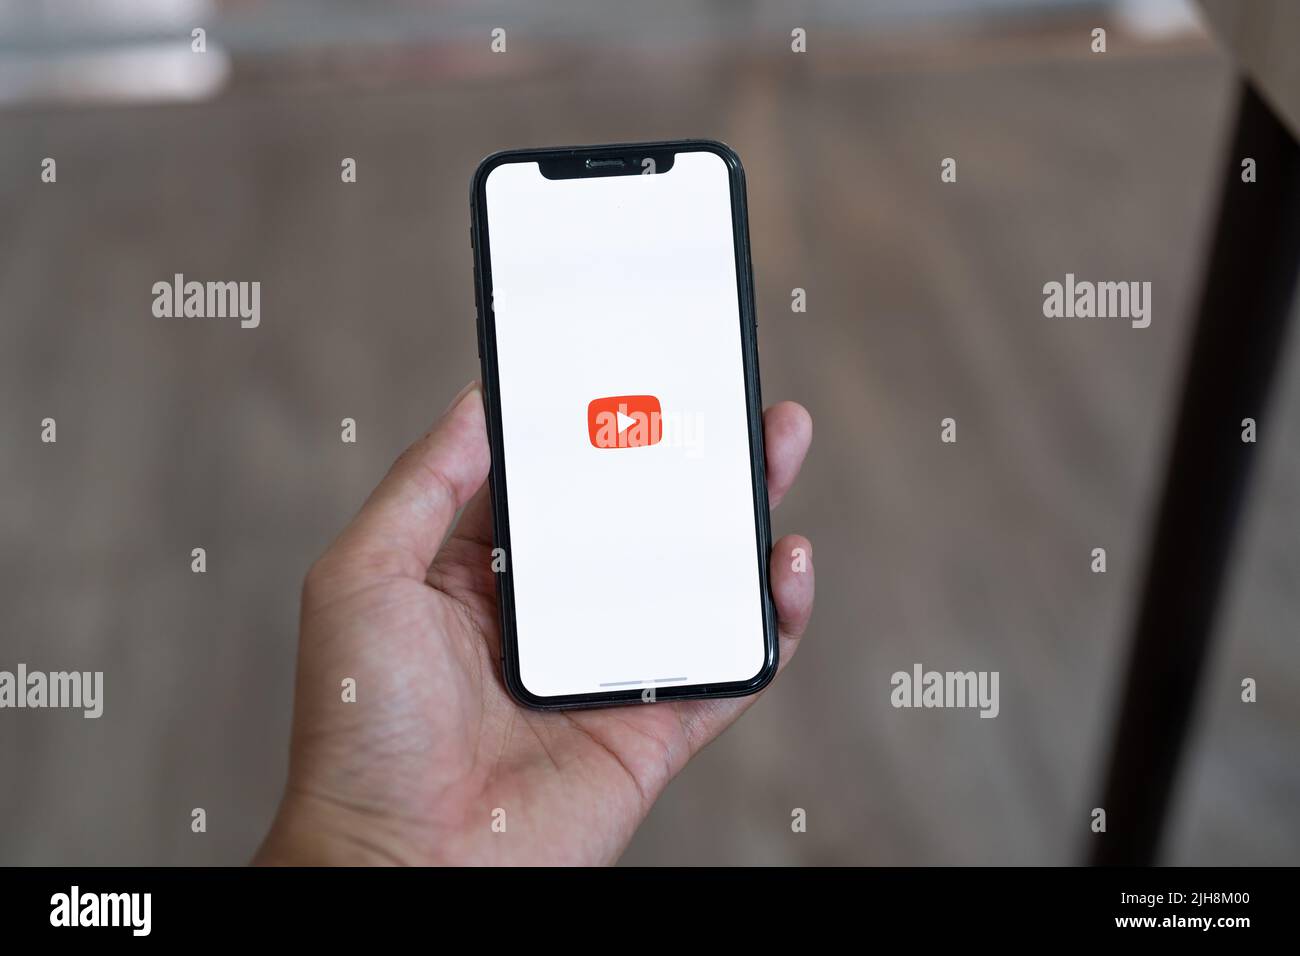 CHIANG MAI, THAILAND, JUL 12, 2022 : Woman hand holding Apple iPhone X with App YouTube provides streaming media and video on the screen. Stock Photo